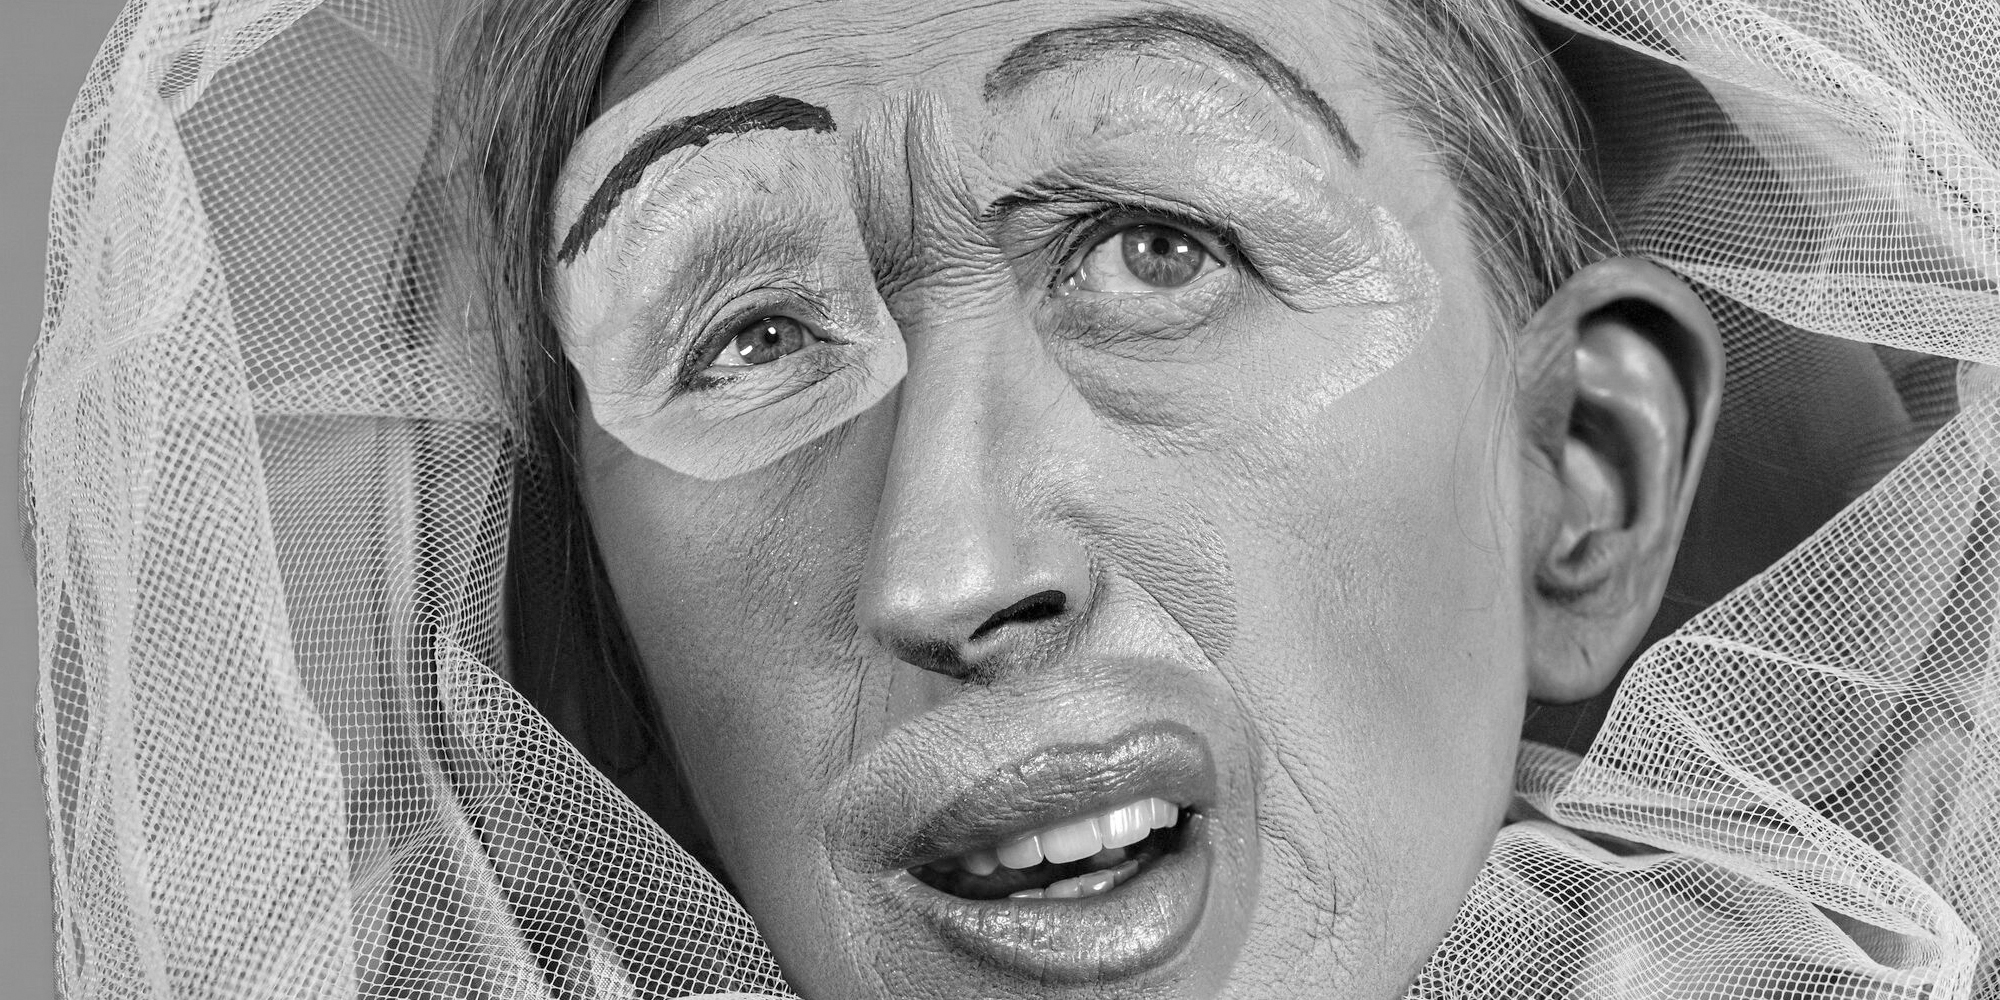 Cindy Sherman and David Salle - History Portraits and Tapestry